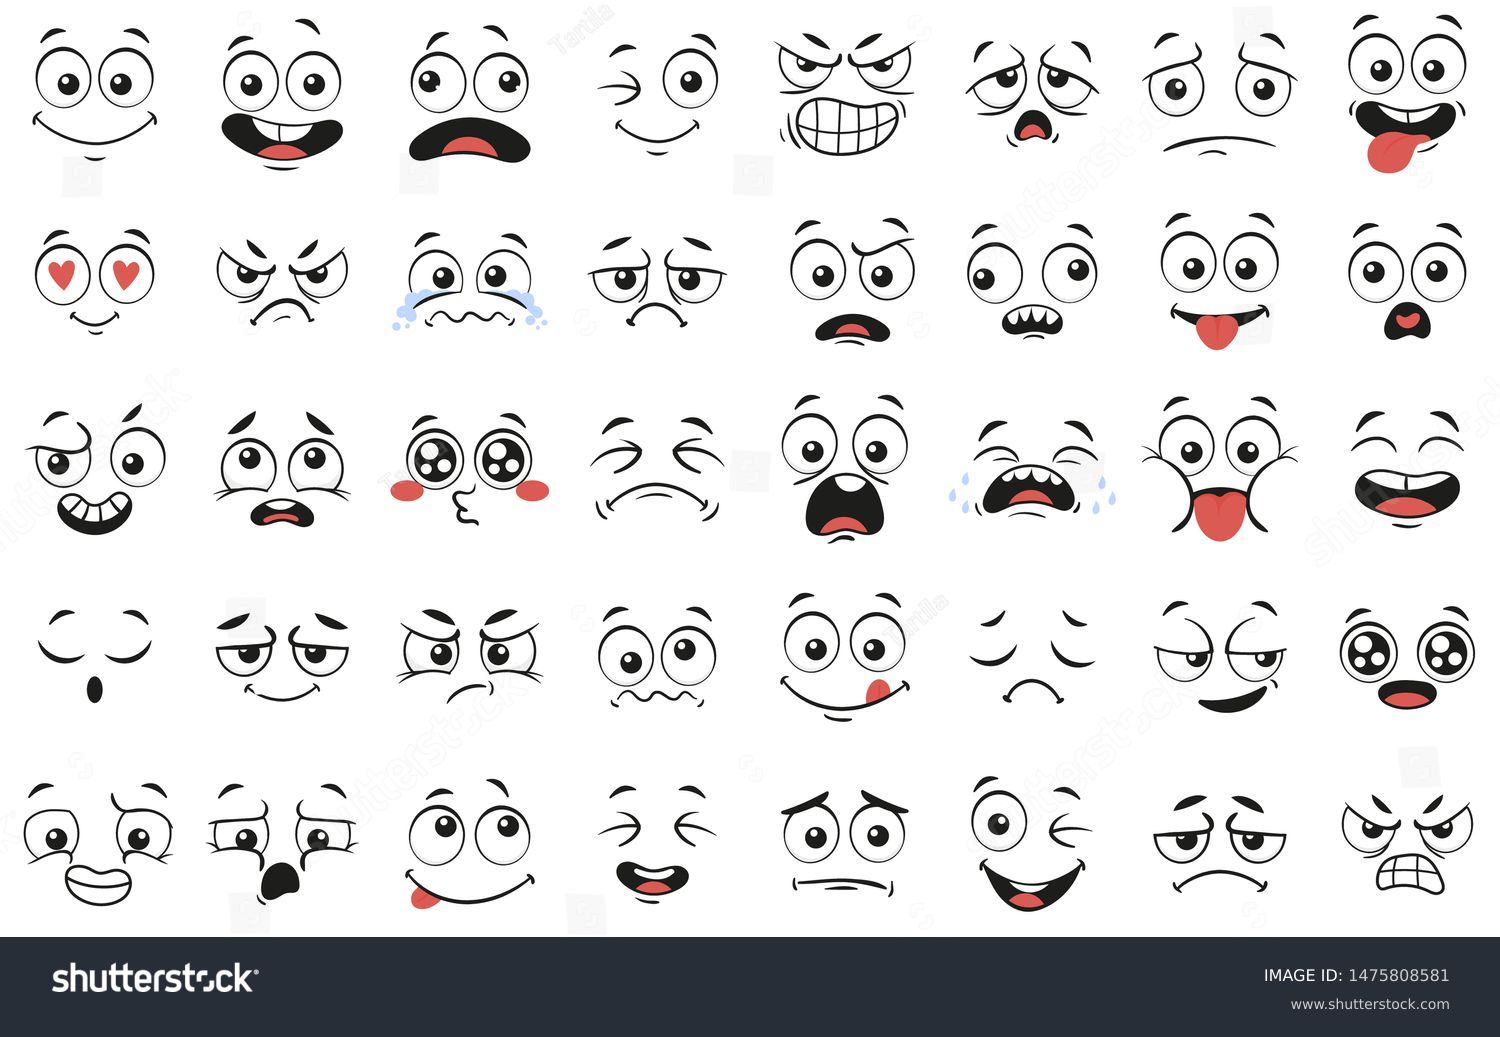 Cartoon faces. Expressive eyes and mouth, smiling, crying and surprised character face expressions. Caricature comic emotions or emoticon doodle. Isolated vector illustration icons set #1475808581